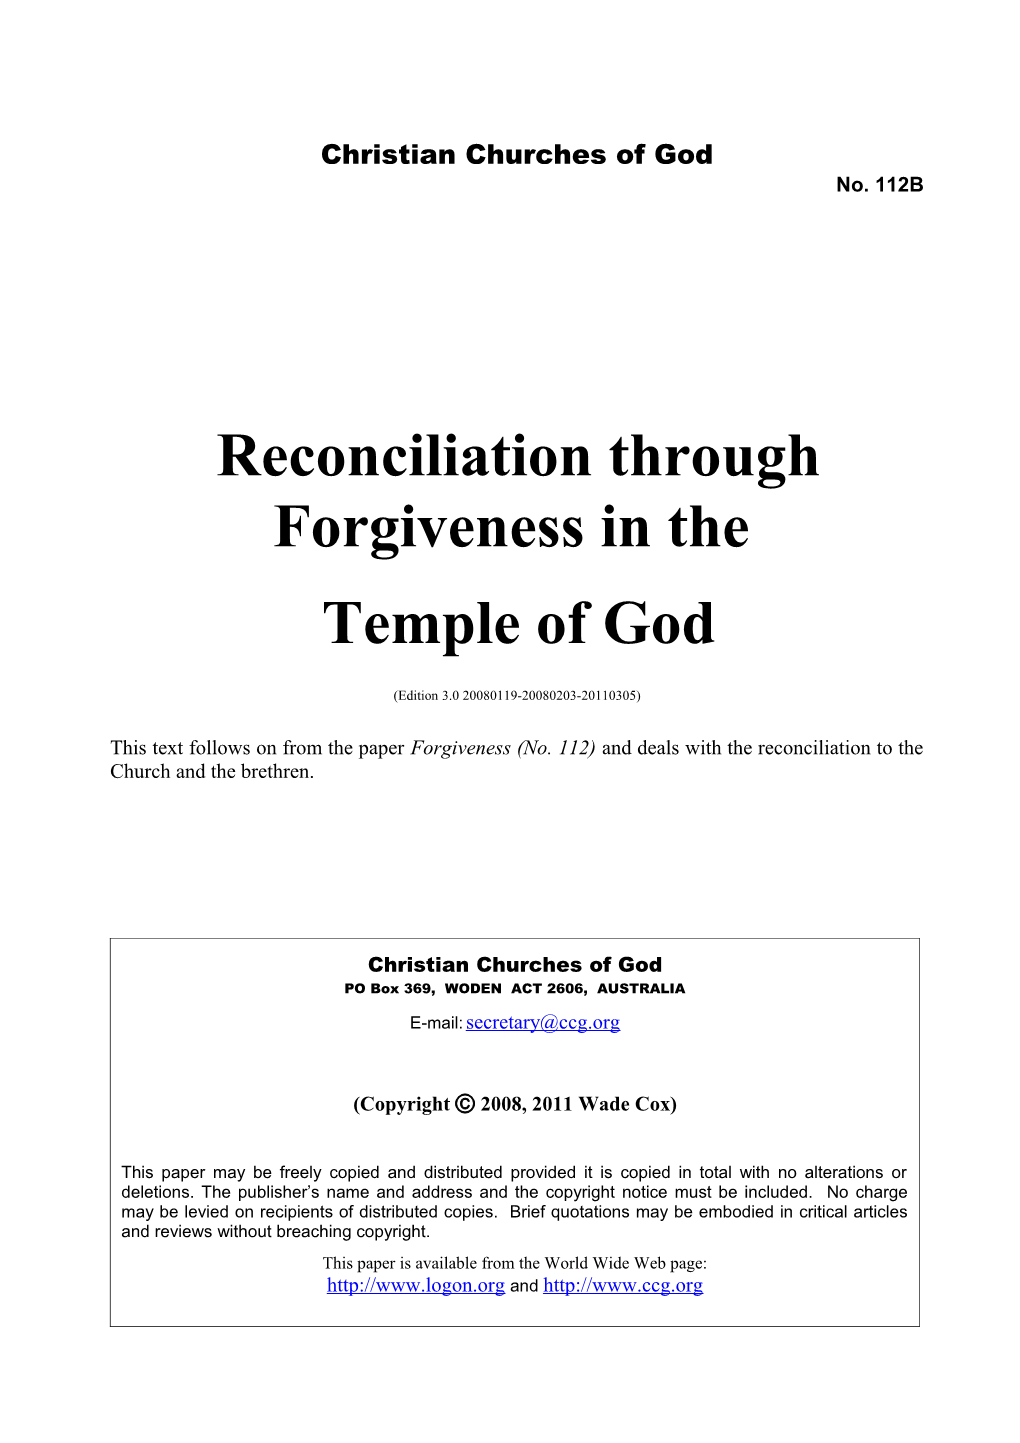 Reconciliation Through Forgiveness in the Temple of God (No. 112B)